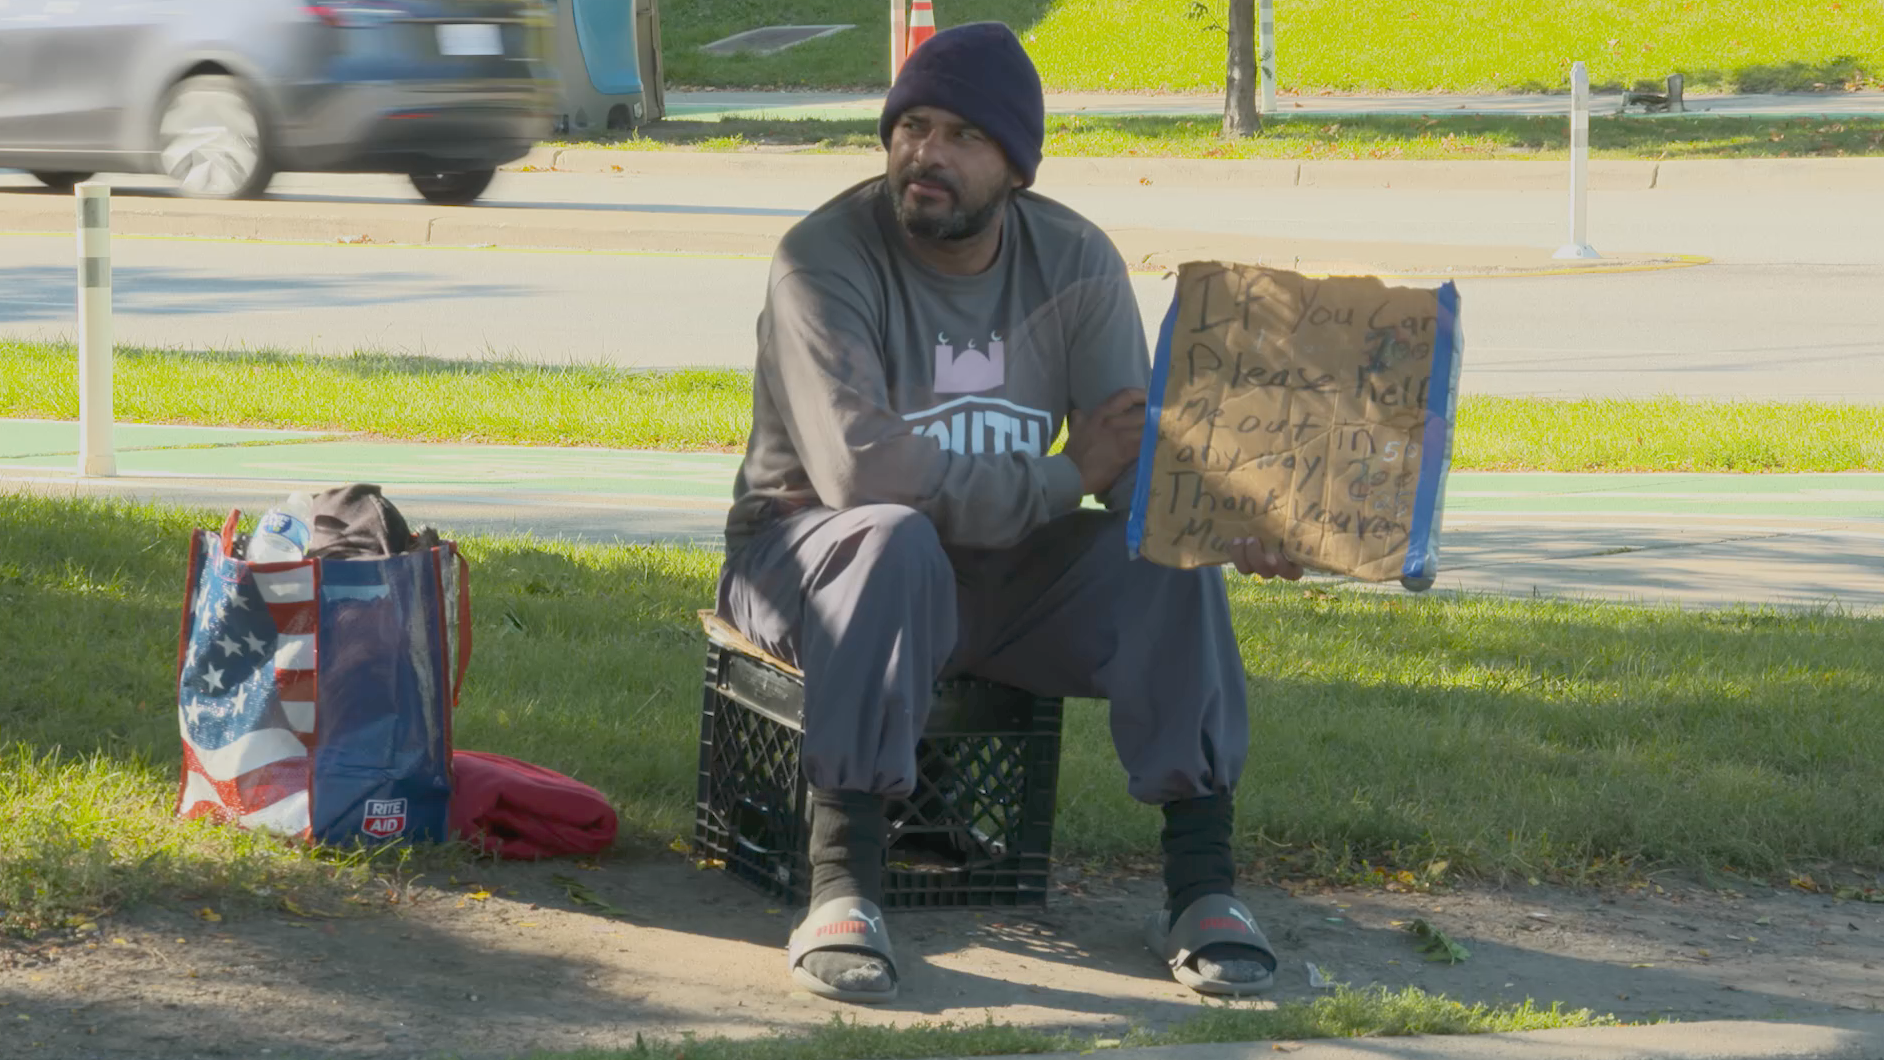 Modal Image Opens to lightbox video - A homeless person with a sign